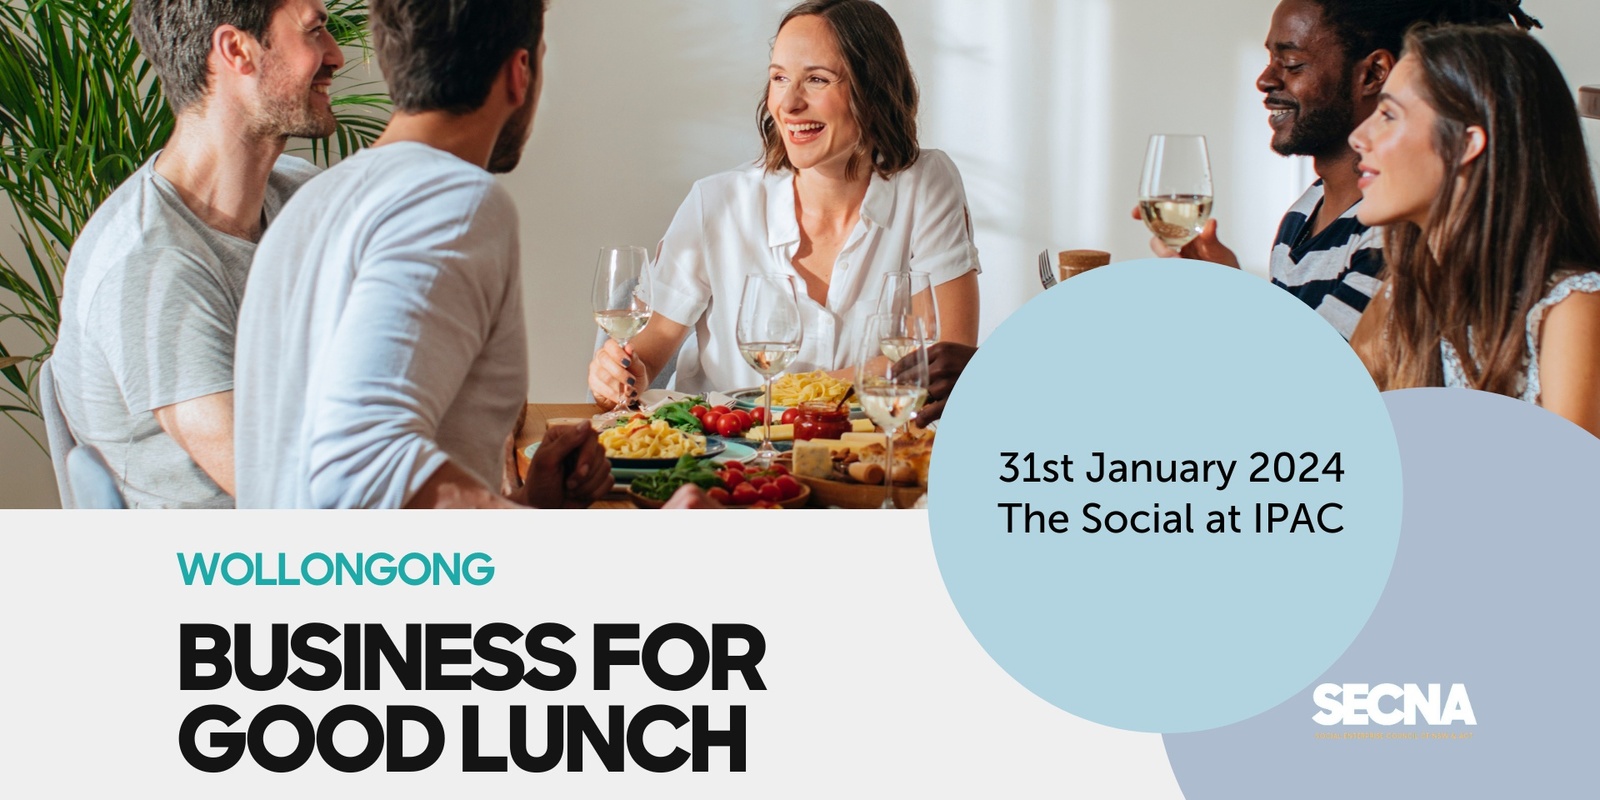 Banner image for Wollongong Business for Good Lunch